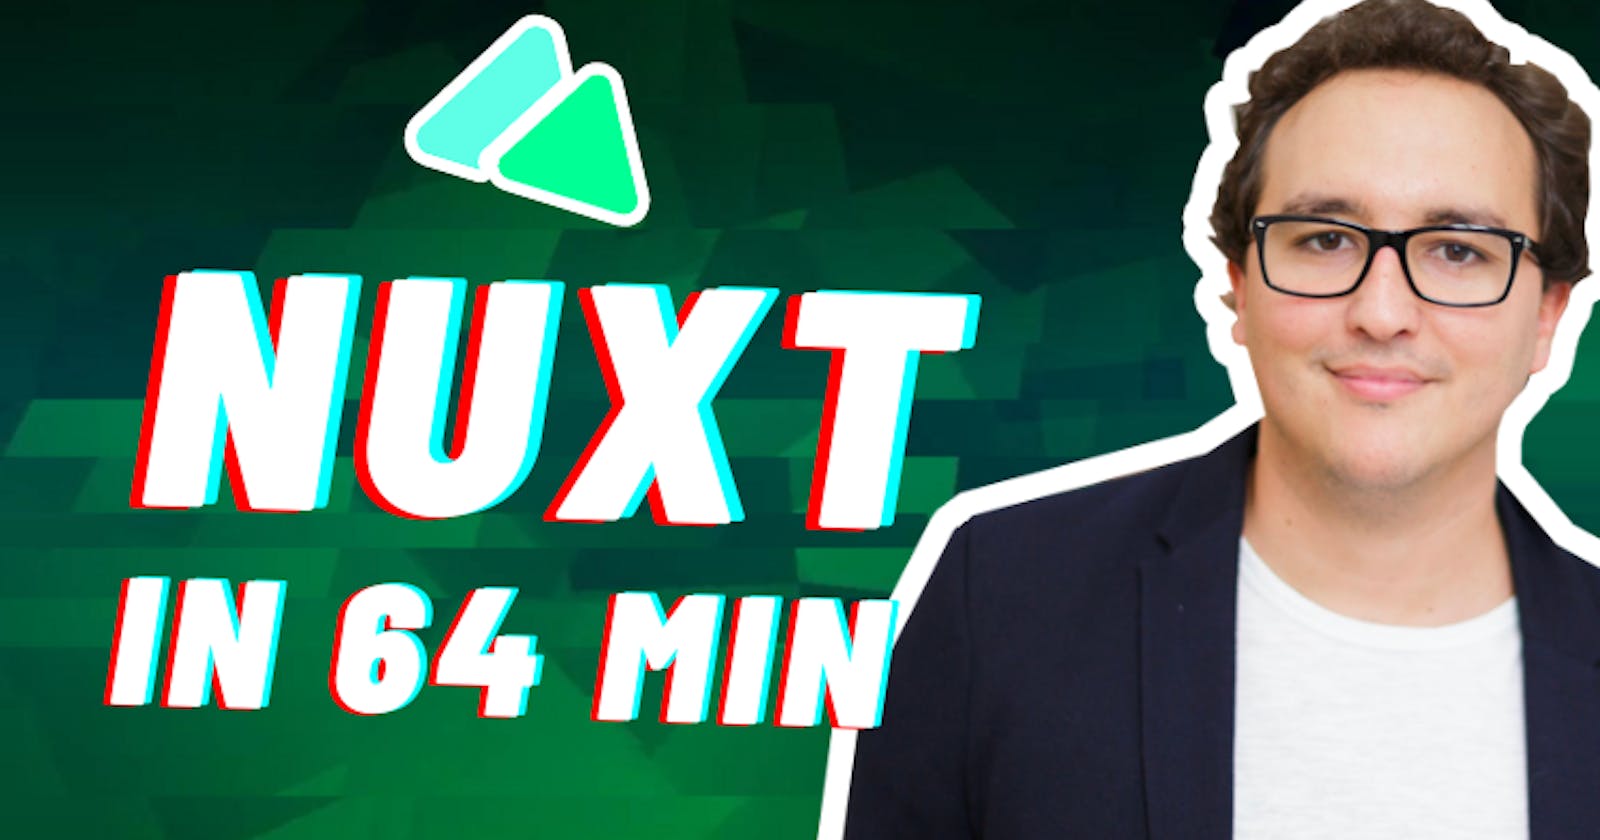 Discover Nuxt.js in 64 minutes (video)